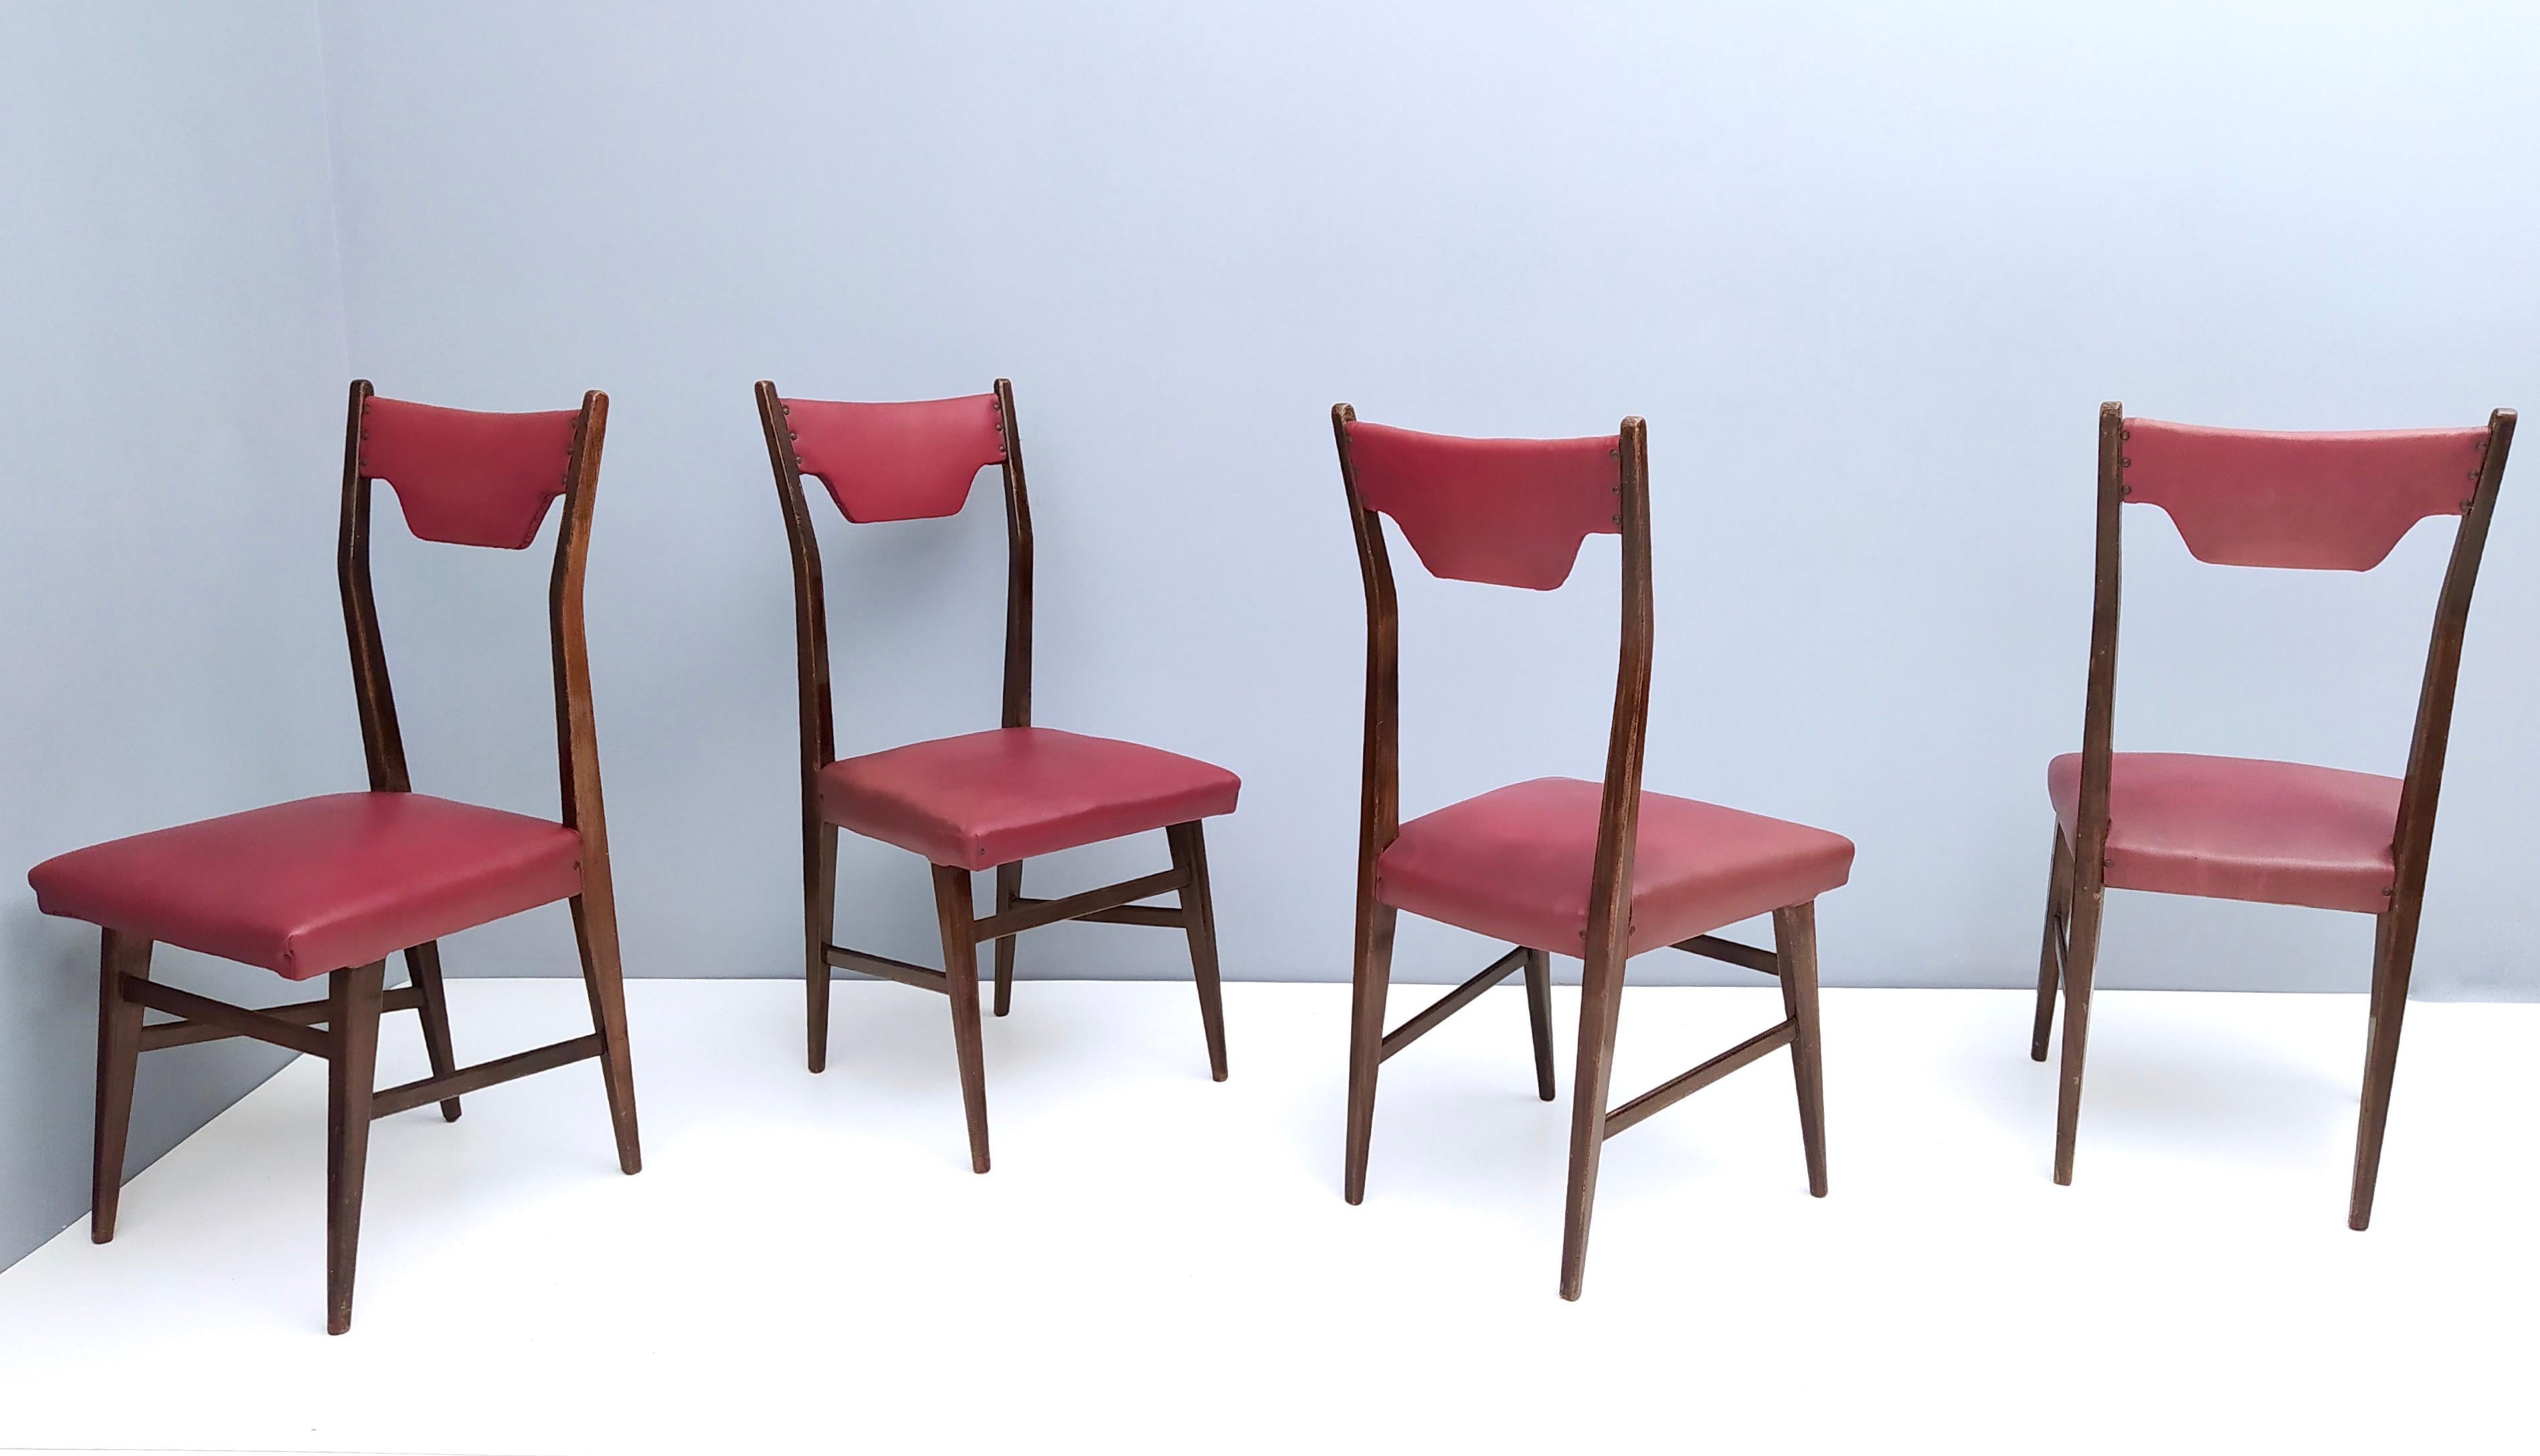 Made in Italy, 1950s.
These chairs feature an ebonized beech frame, brass nails and their original crimson skai upholstery. 
These are vintage items, therefore they might show slight traces of use, but they are solid and can be considered as in good